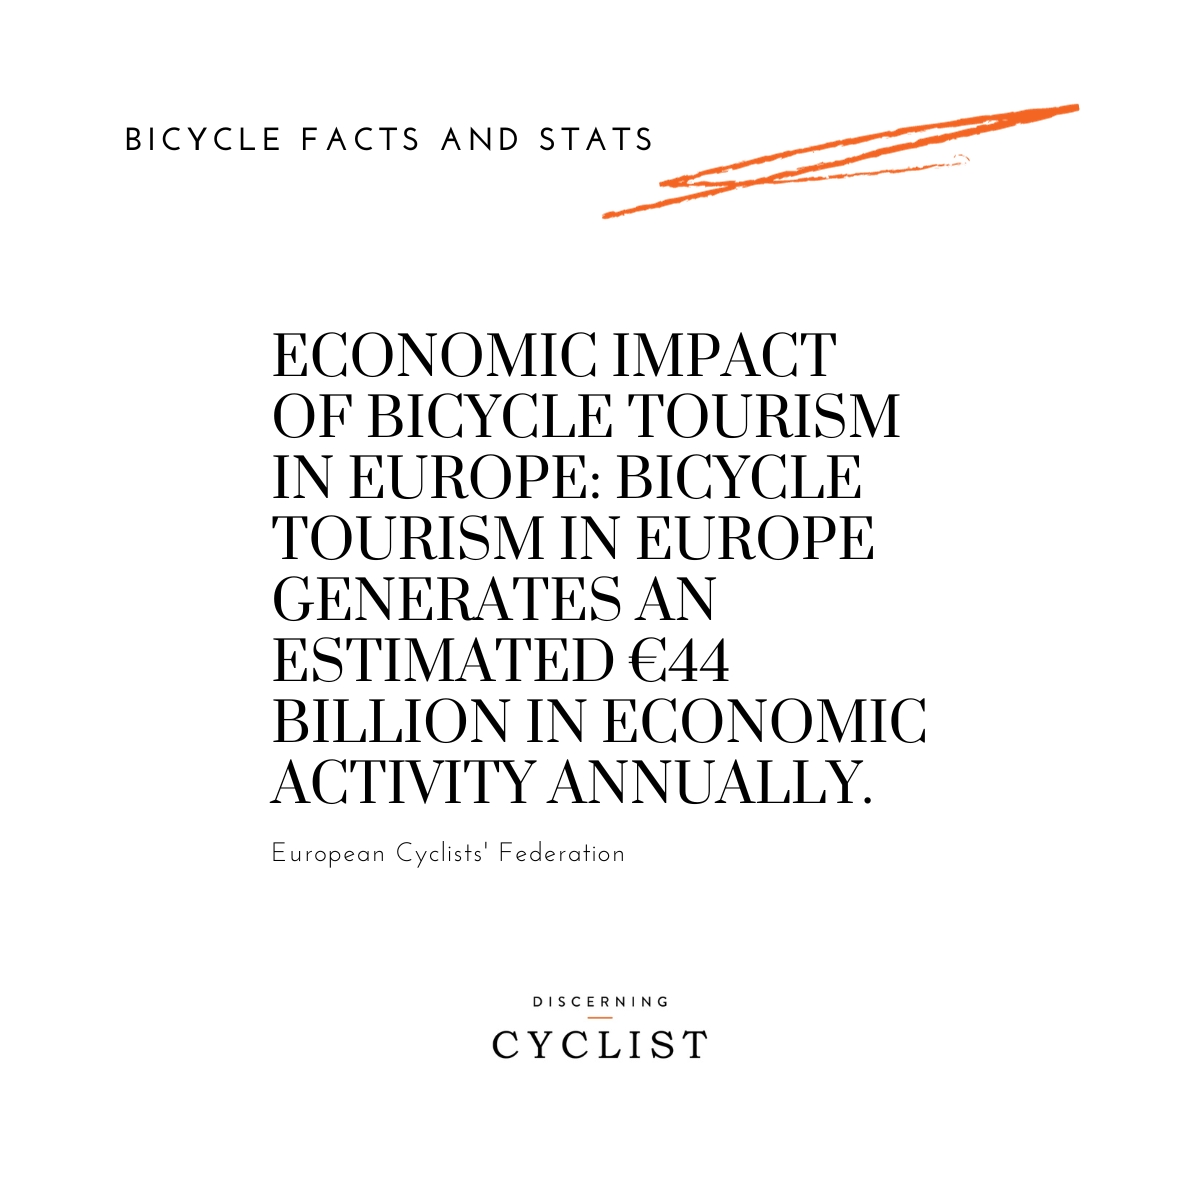 Economic Impact of Bicycle Tourism in Europe: Bicycle tourism in Europe generates an estimated €44 billion in economic activity annually.